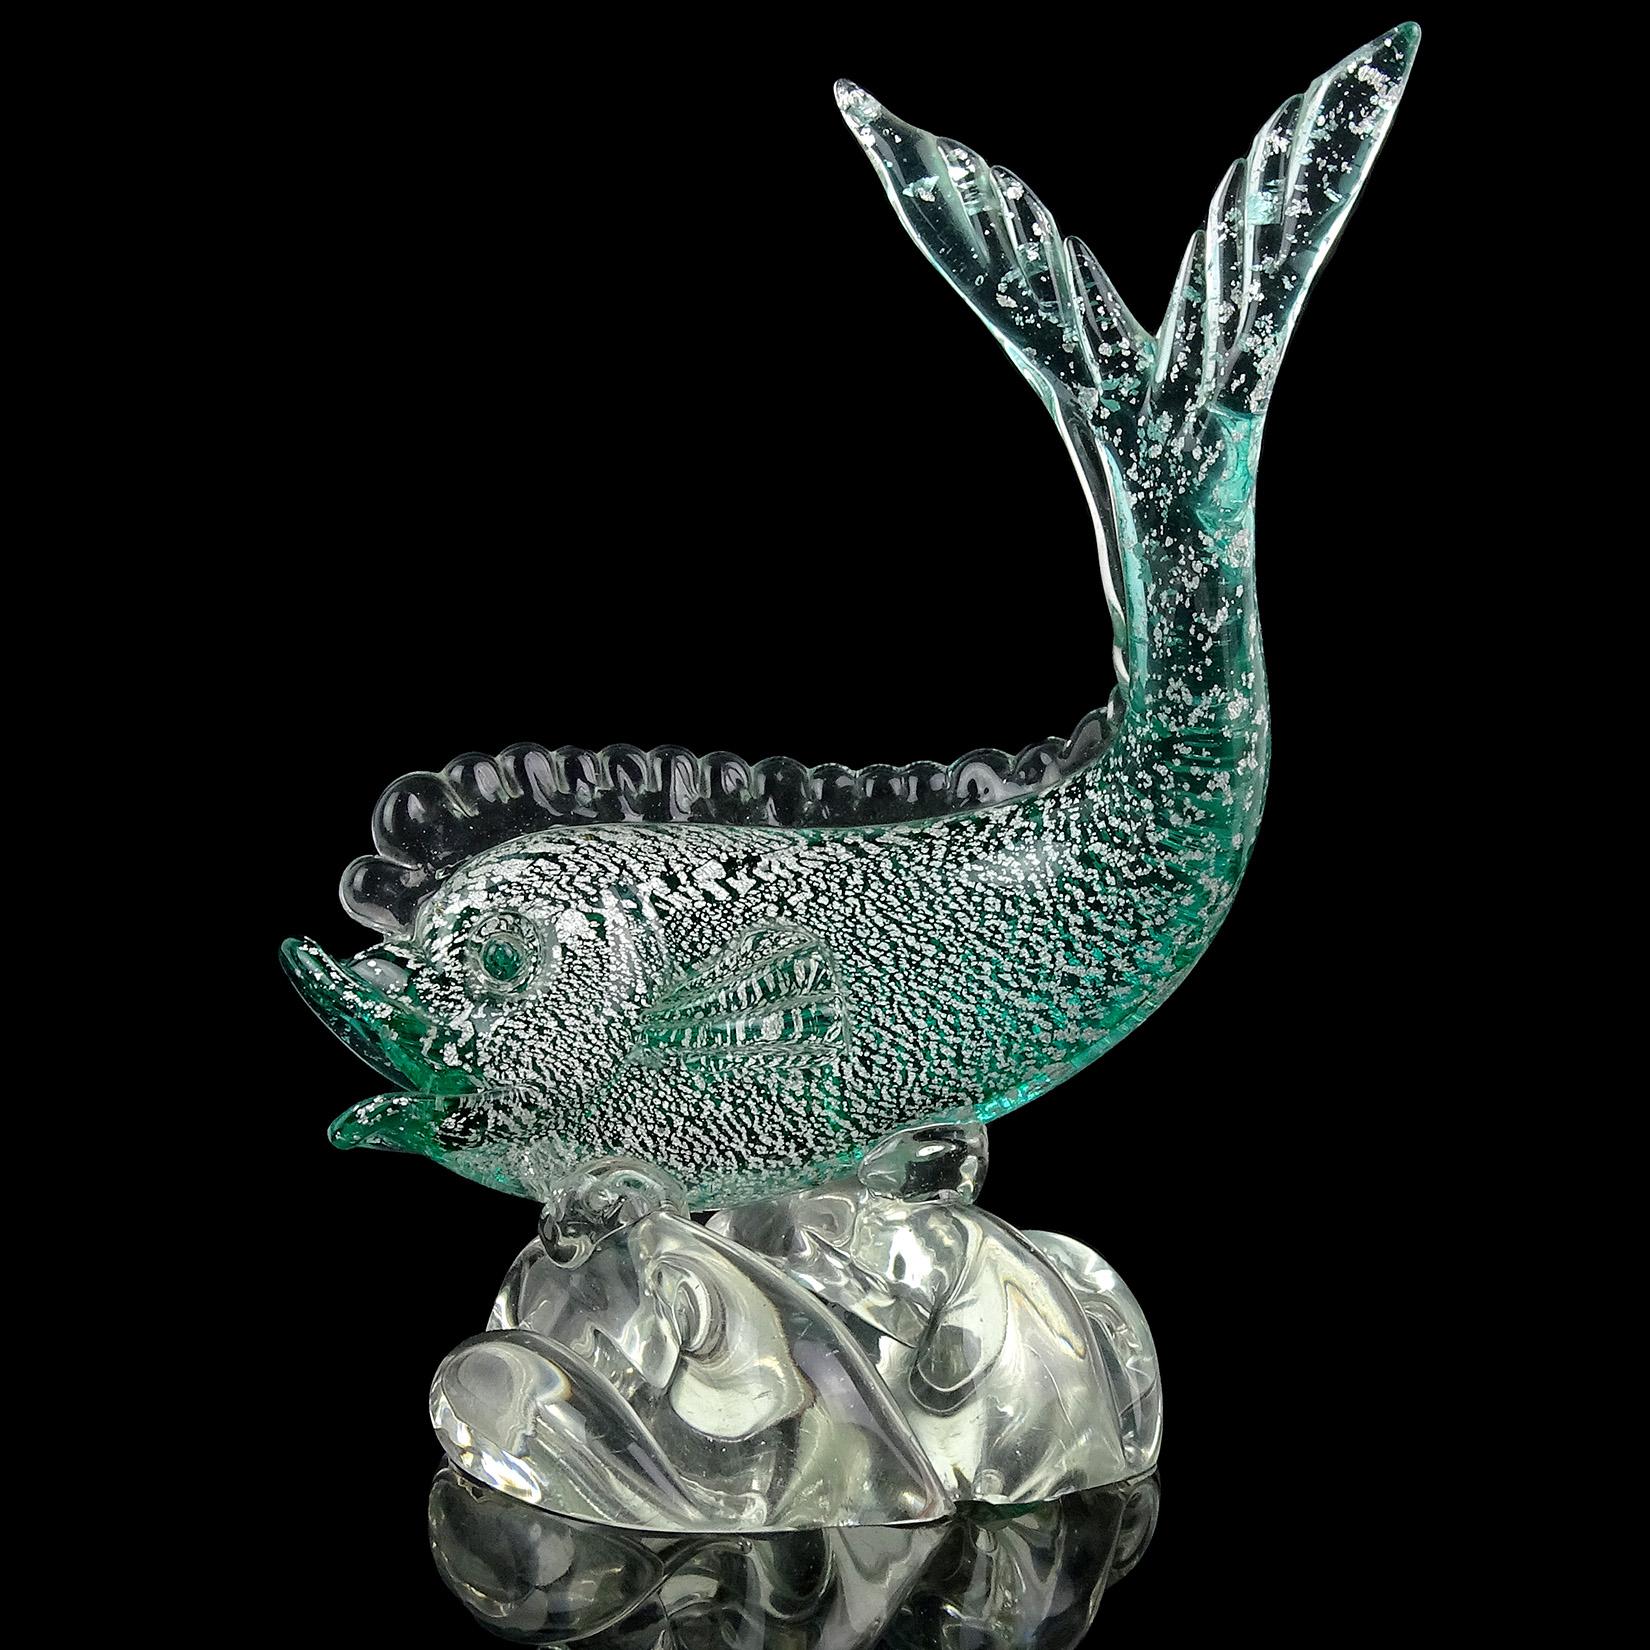 Beautiful early Murano hand blown Sommerso green Italian art glass fish sculpture, covered in silver leaf. In the manner of the Seguso Vetri D' Arte company, circa 1940s. The fish stands on a wave of water. Art Deco - Mid-century era. Measures 8